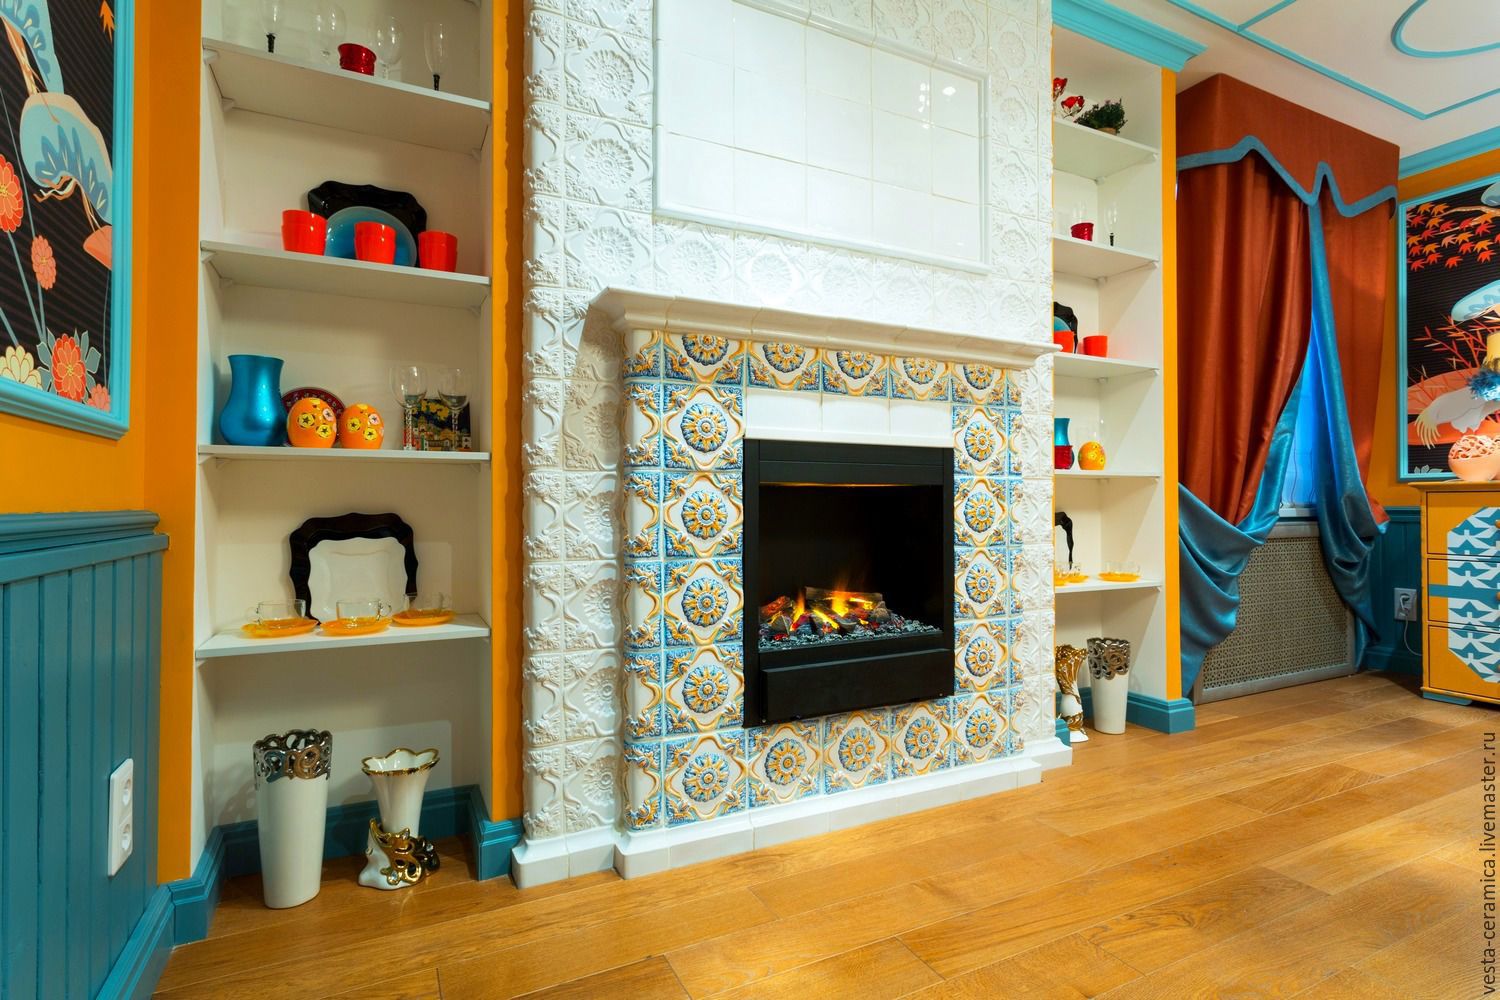 Tiled Fireplaces Images Inspirational Tiled Fireplace